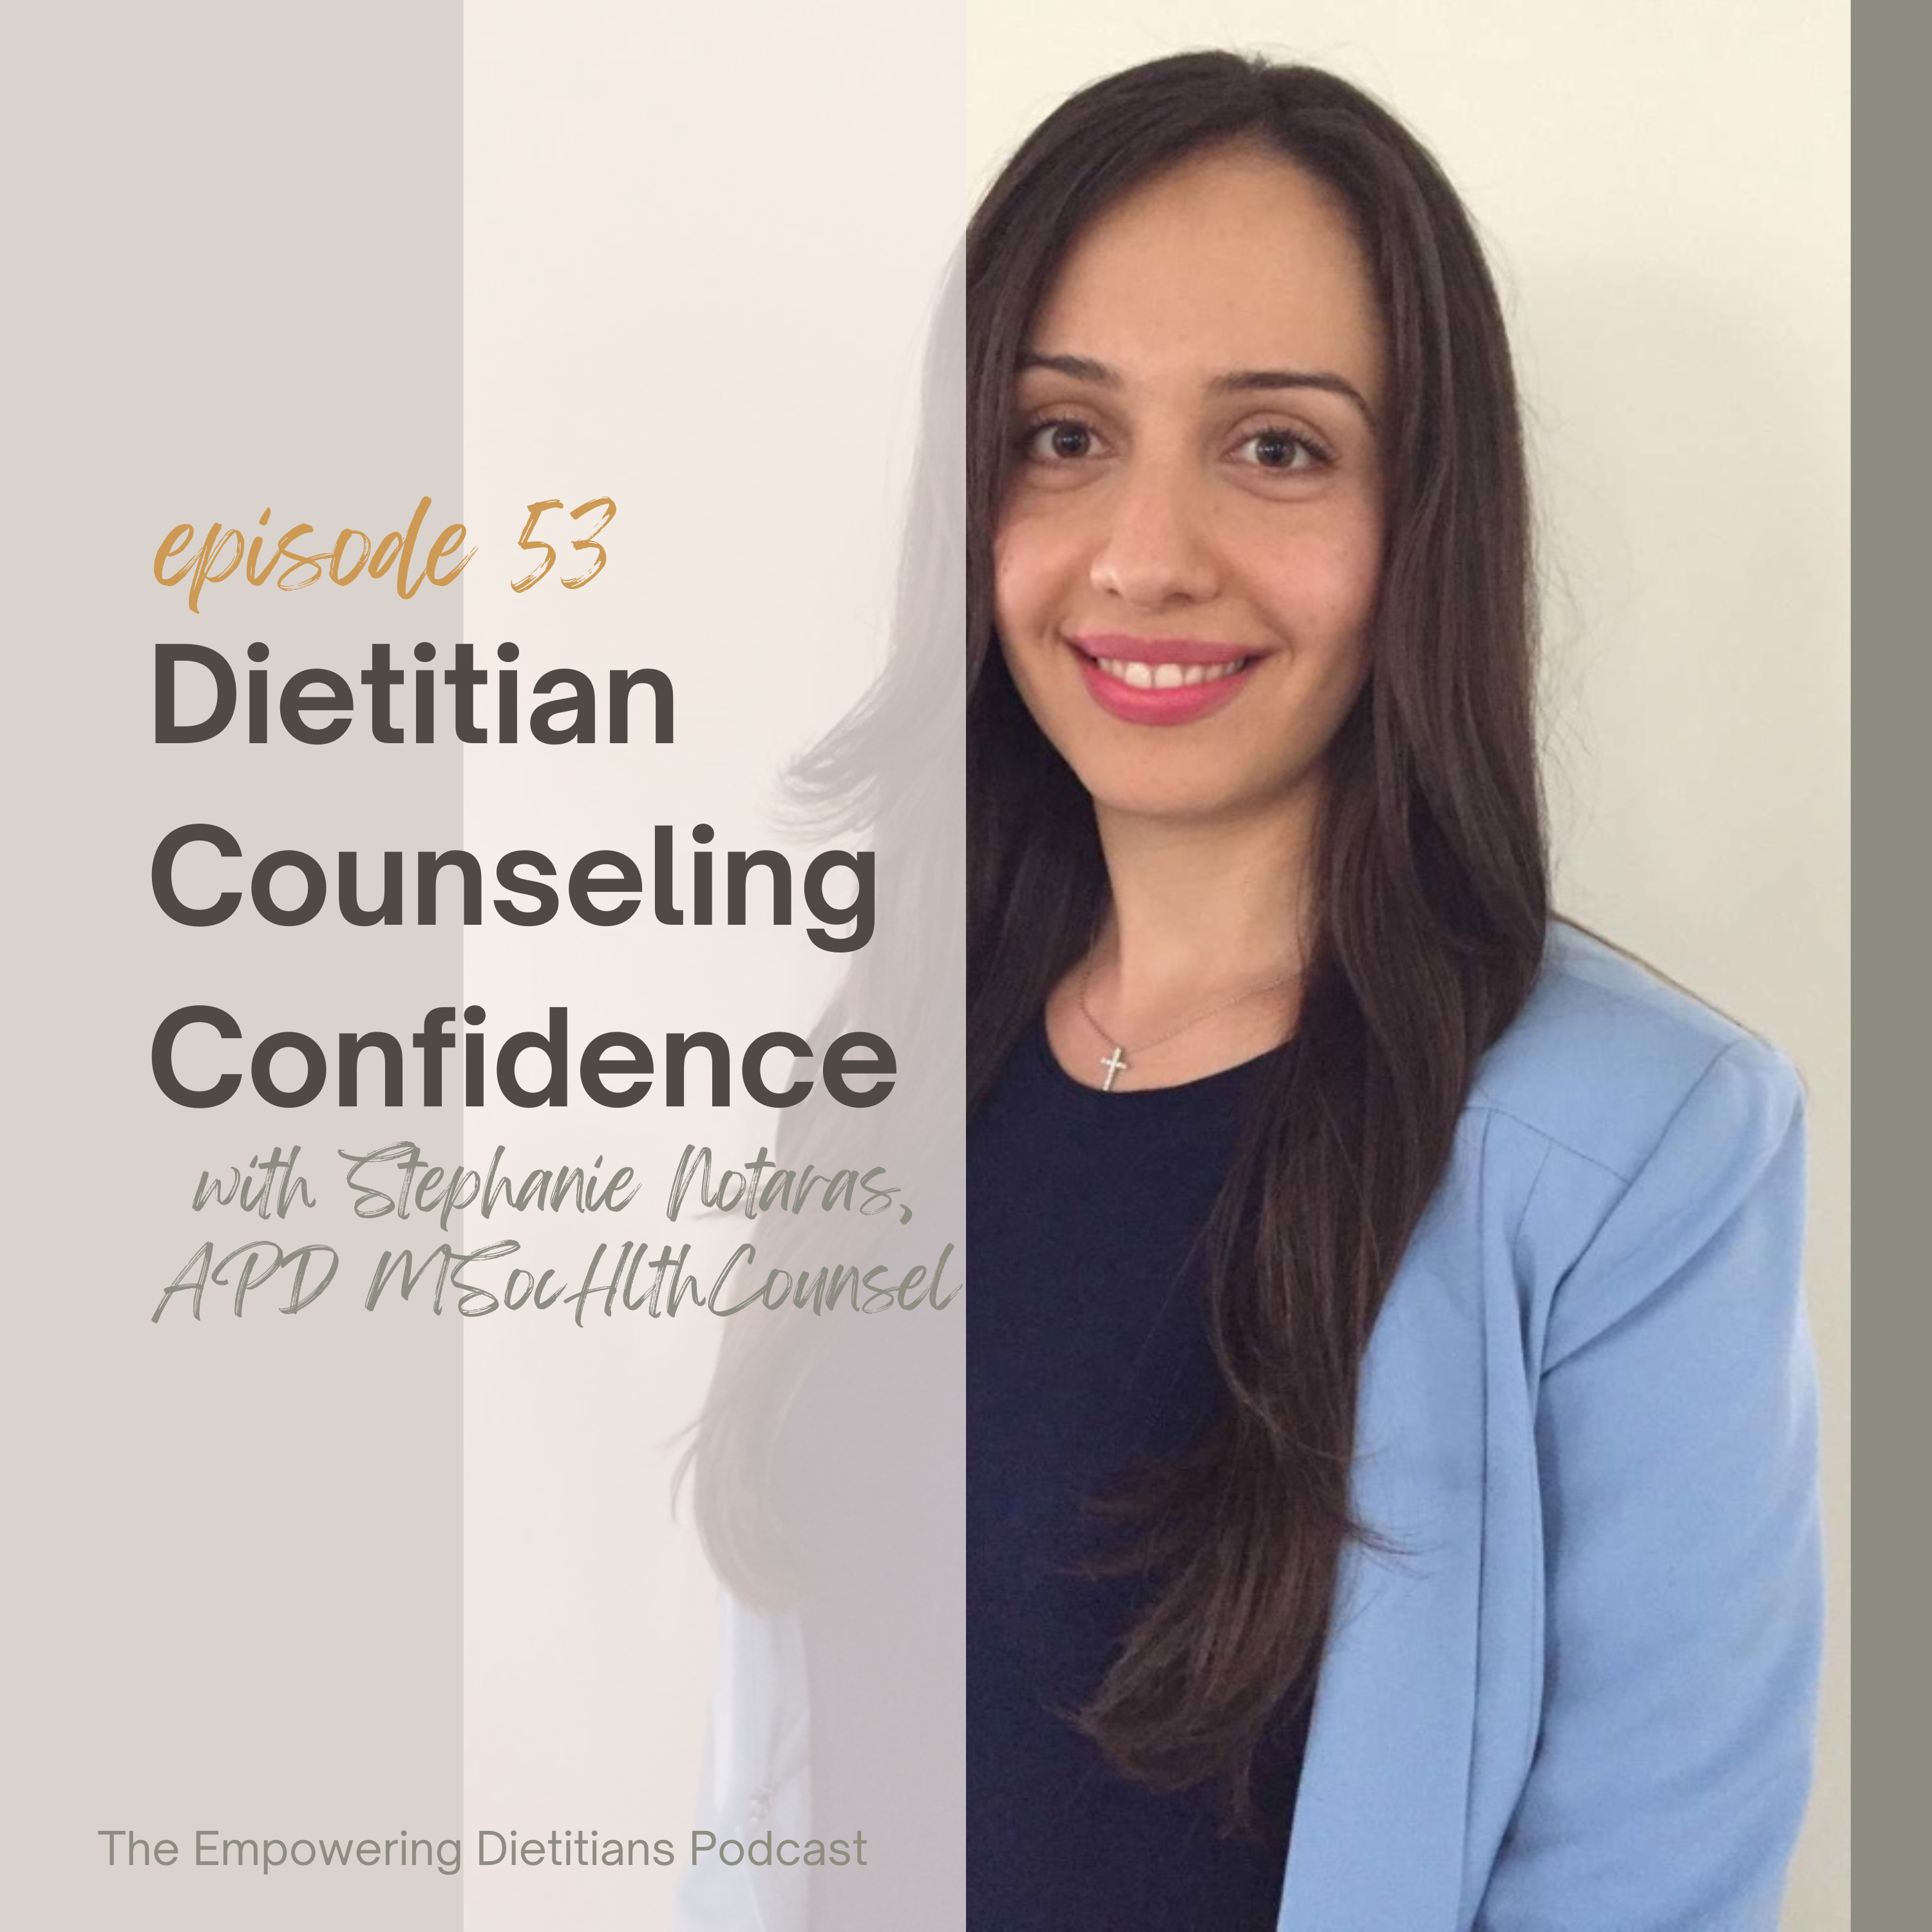 dietitian counseling confidence with stephanie notaras